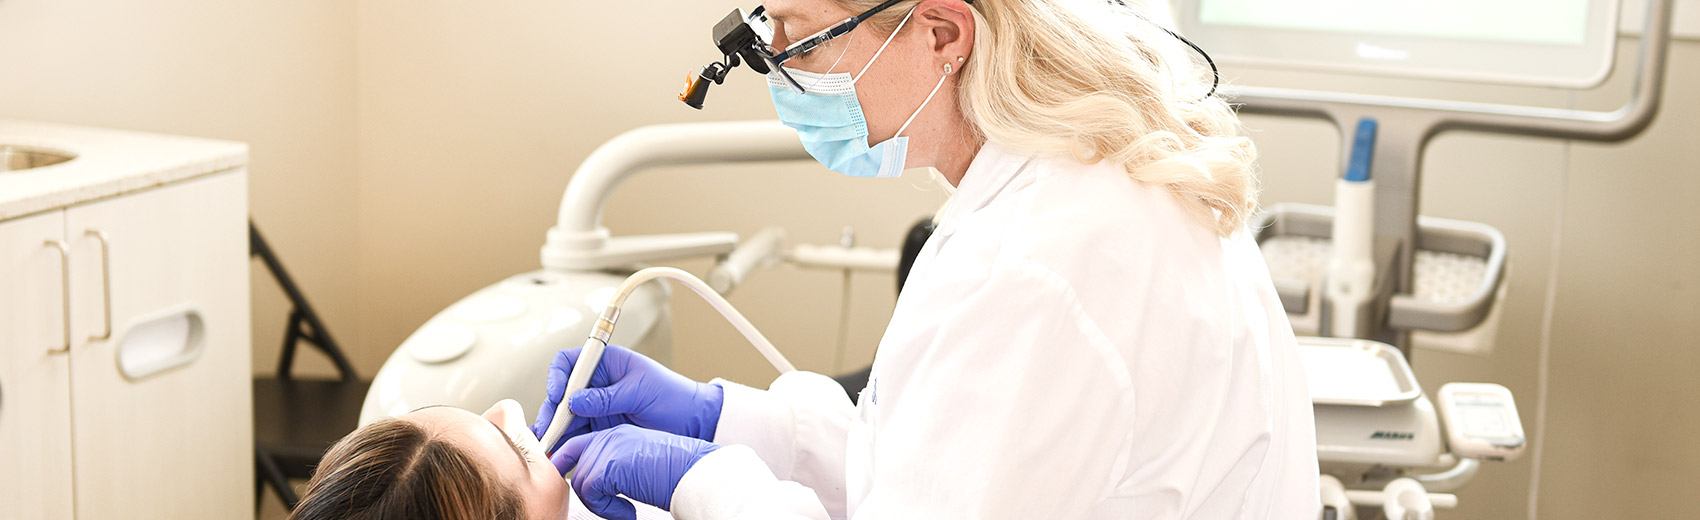 Teeth Cleaning - West Suburban Oral Health Care